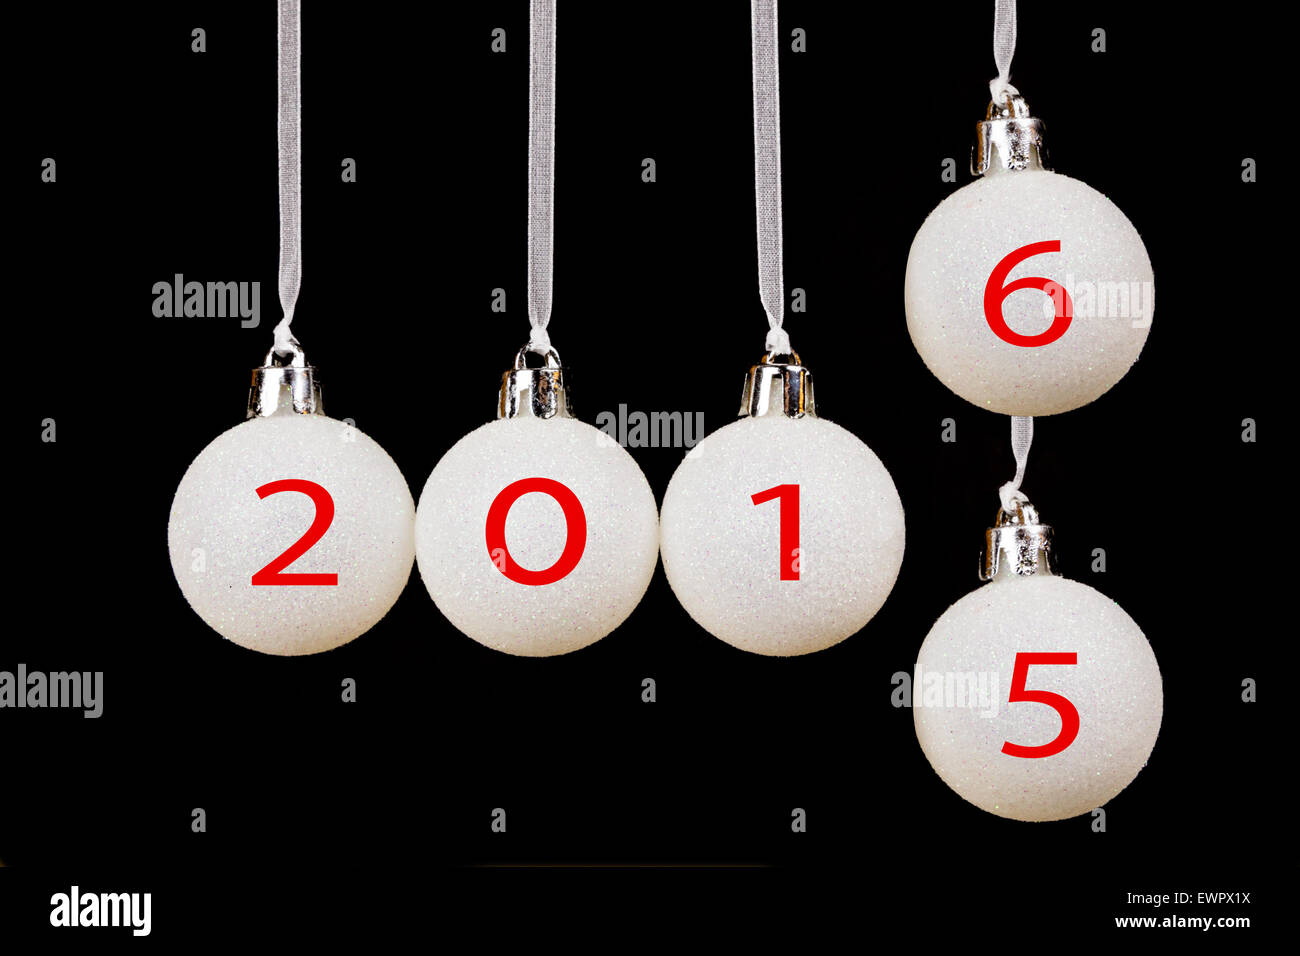 White christmas balls or baubles with dates 2015 old year and 2016 new year on black background Stock Photo